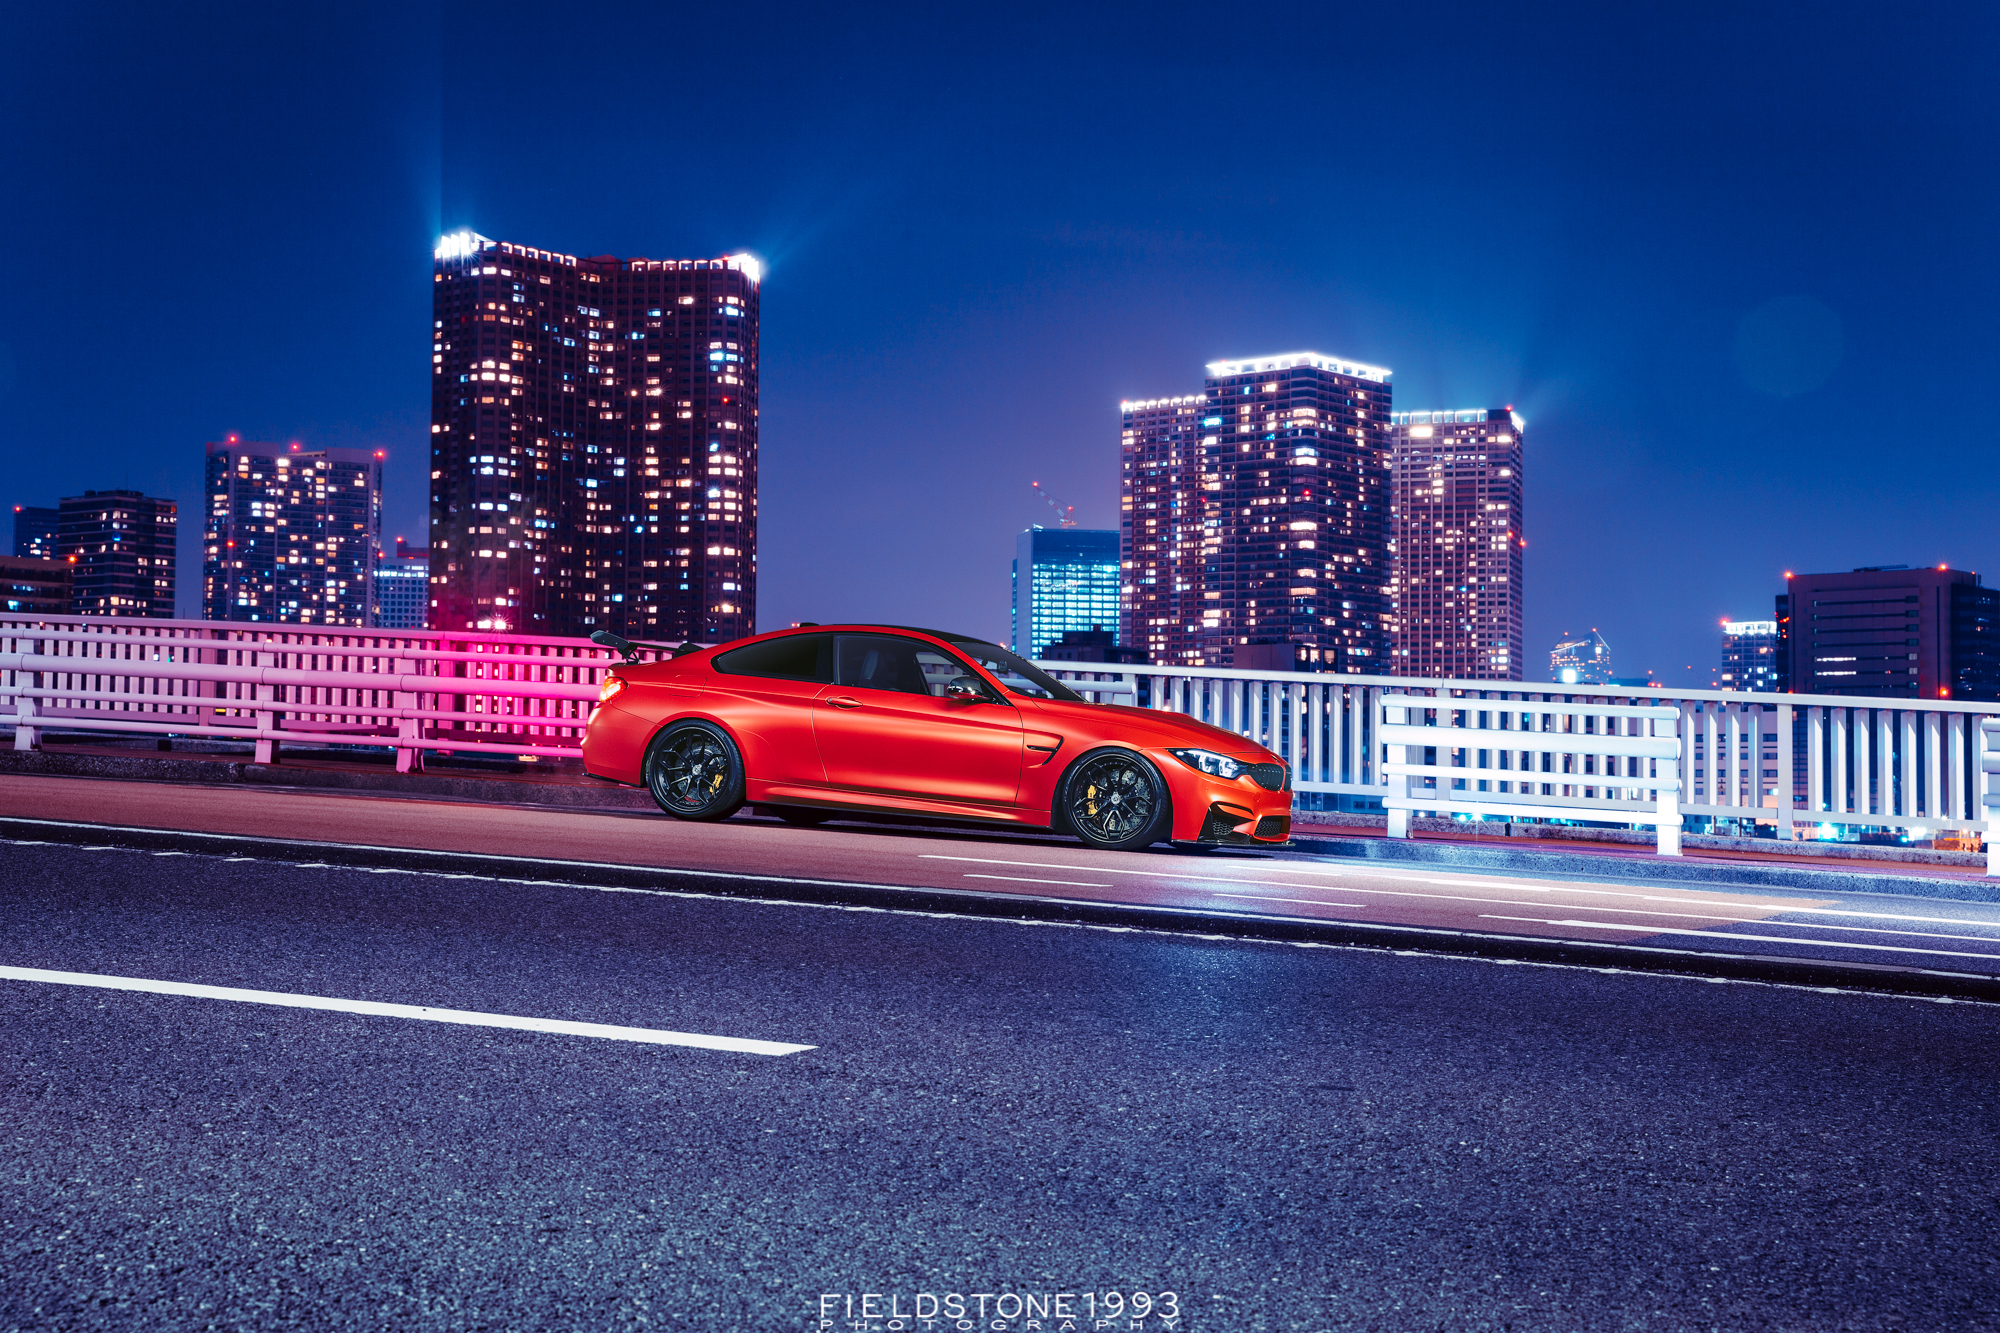 General 2000x1333 car vehicle red cars BMW M4 BMW street outdoors night